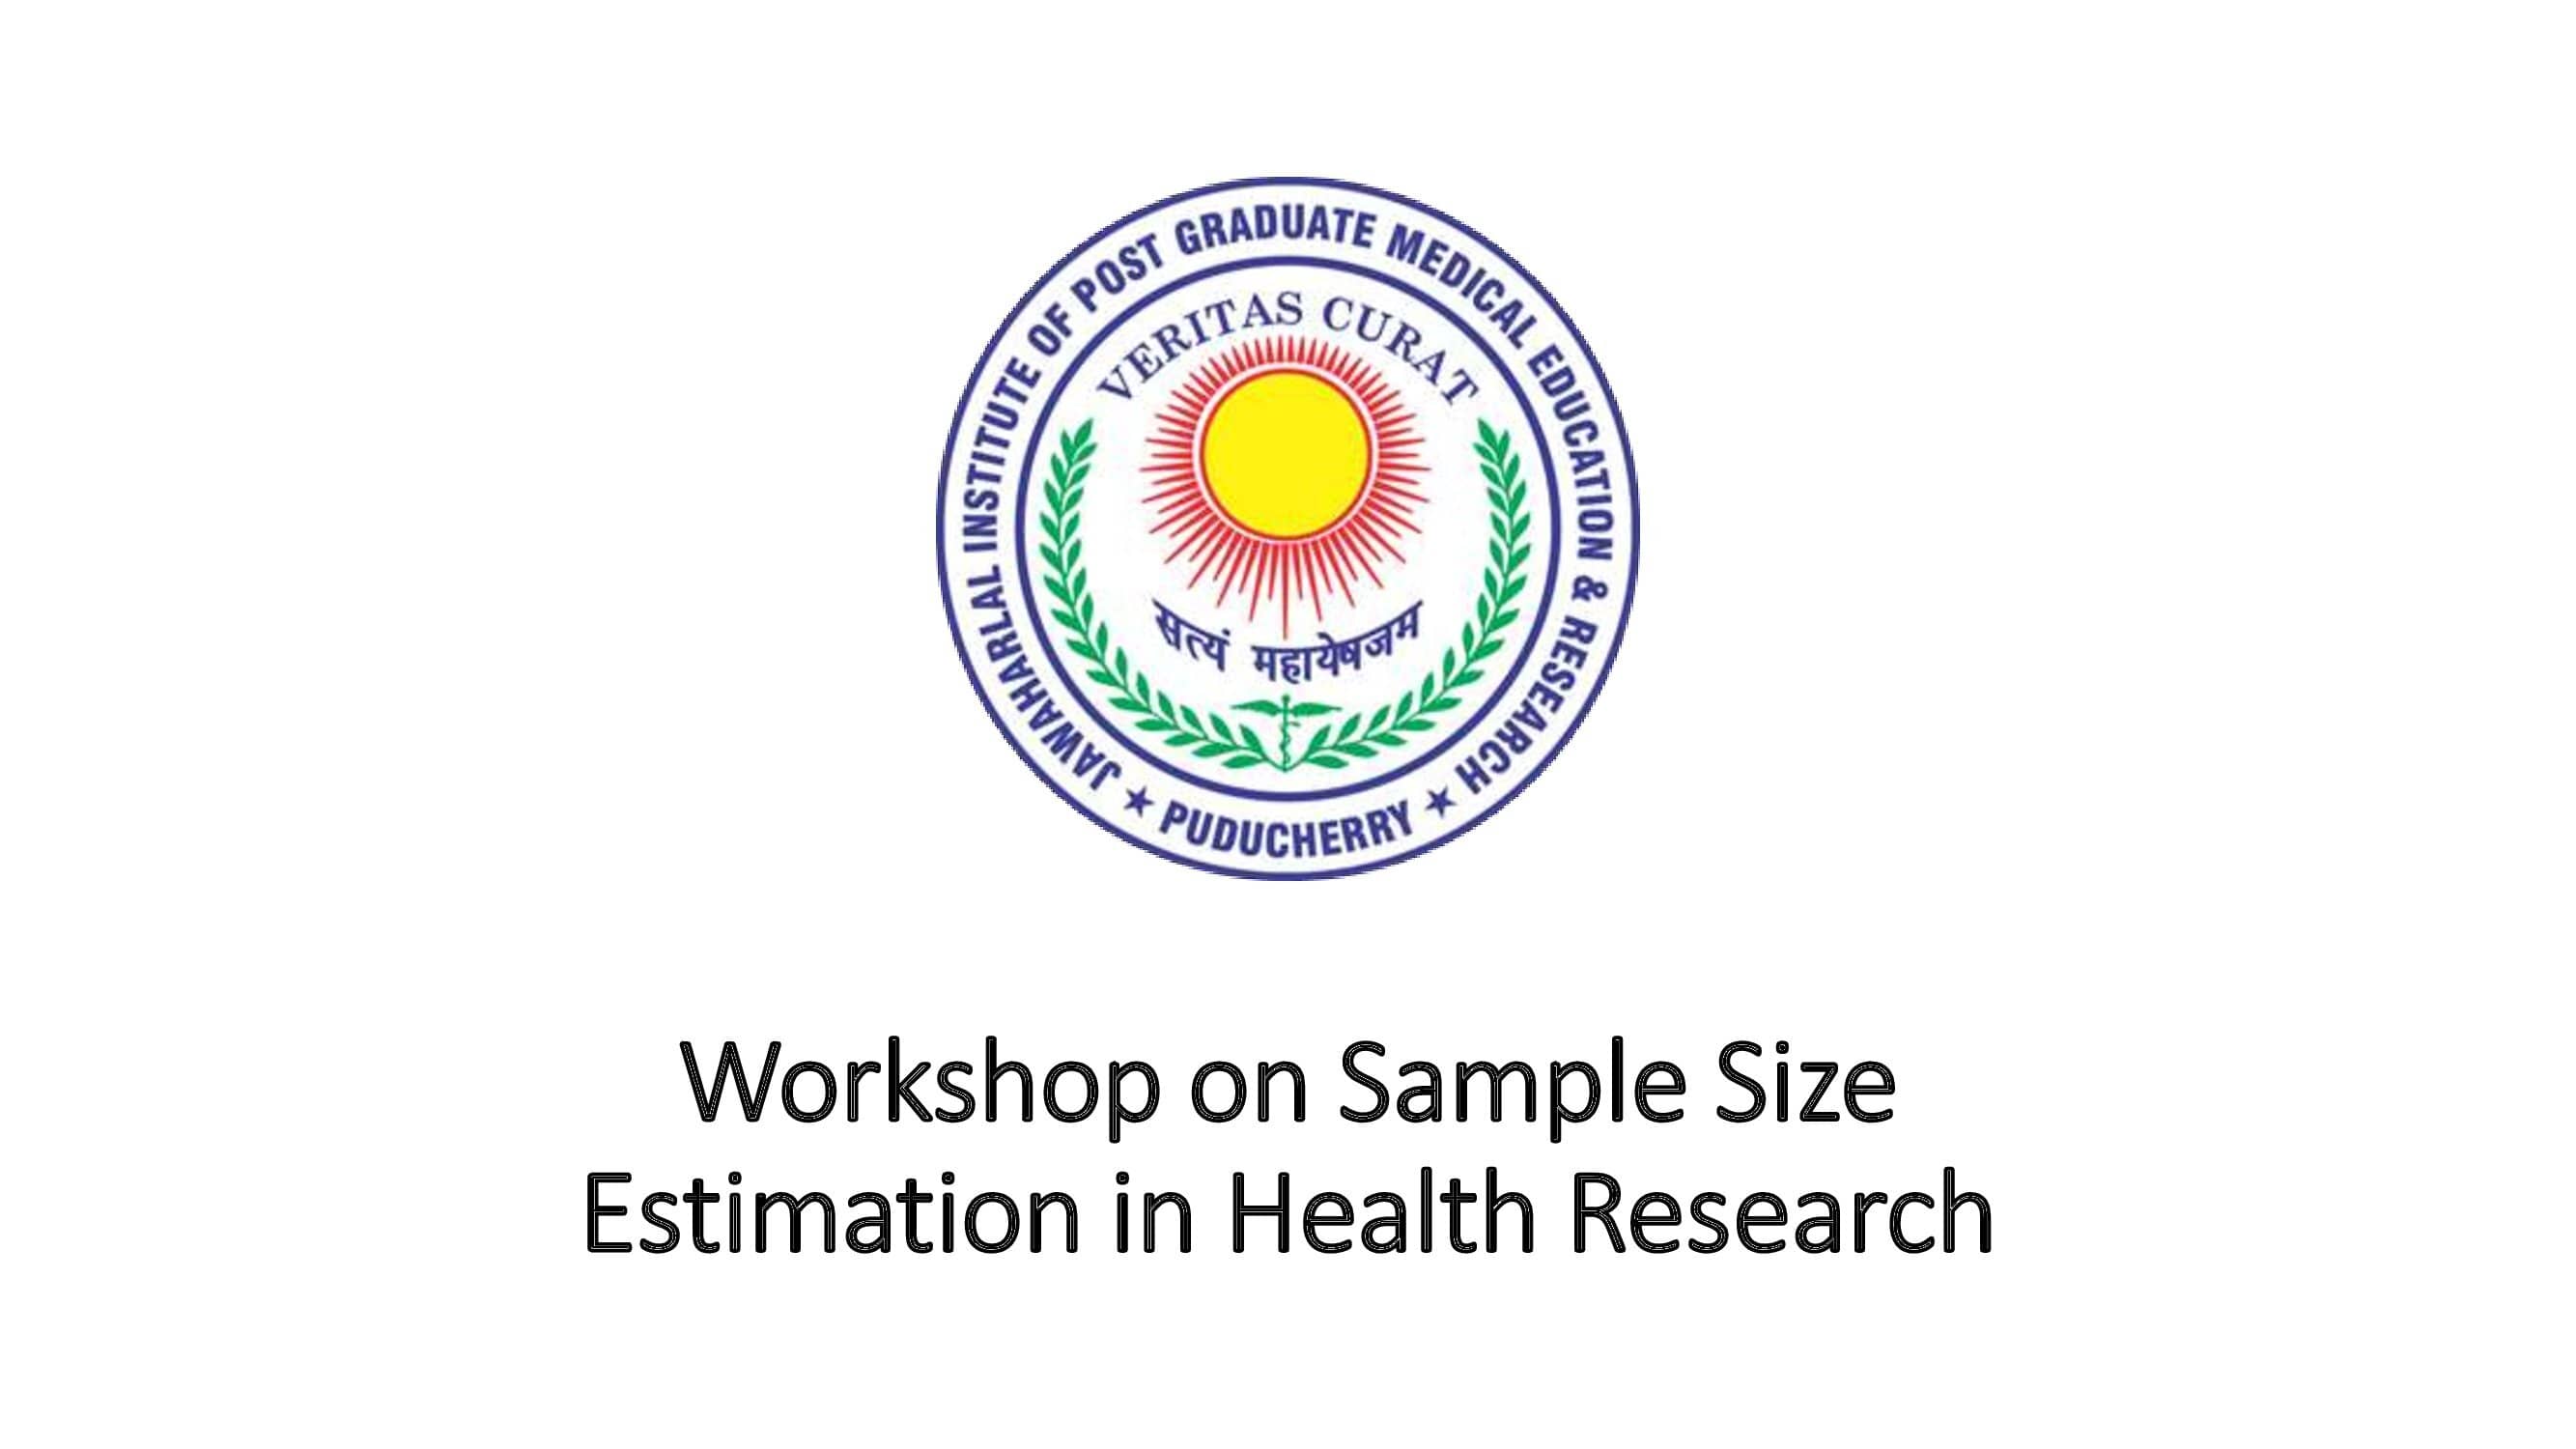 Workshop On Sample Size Estimation - Department Of Biostatistics & Division Of Research